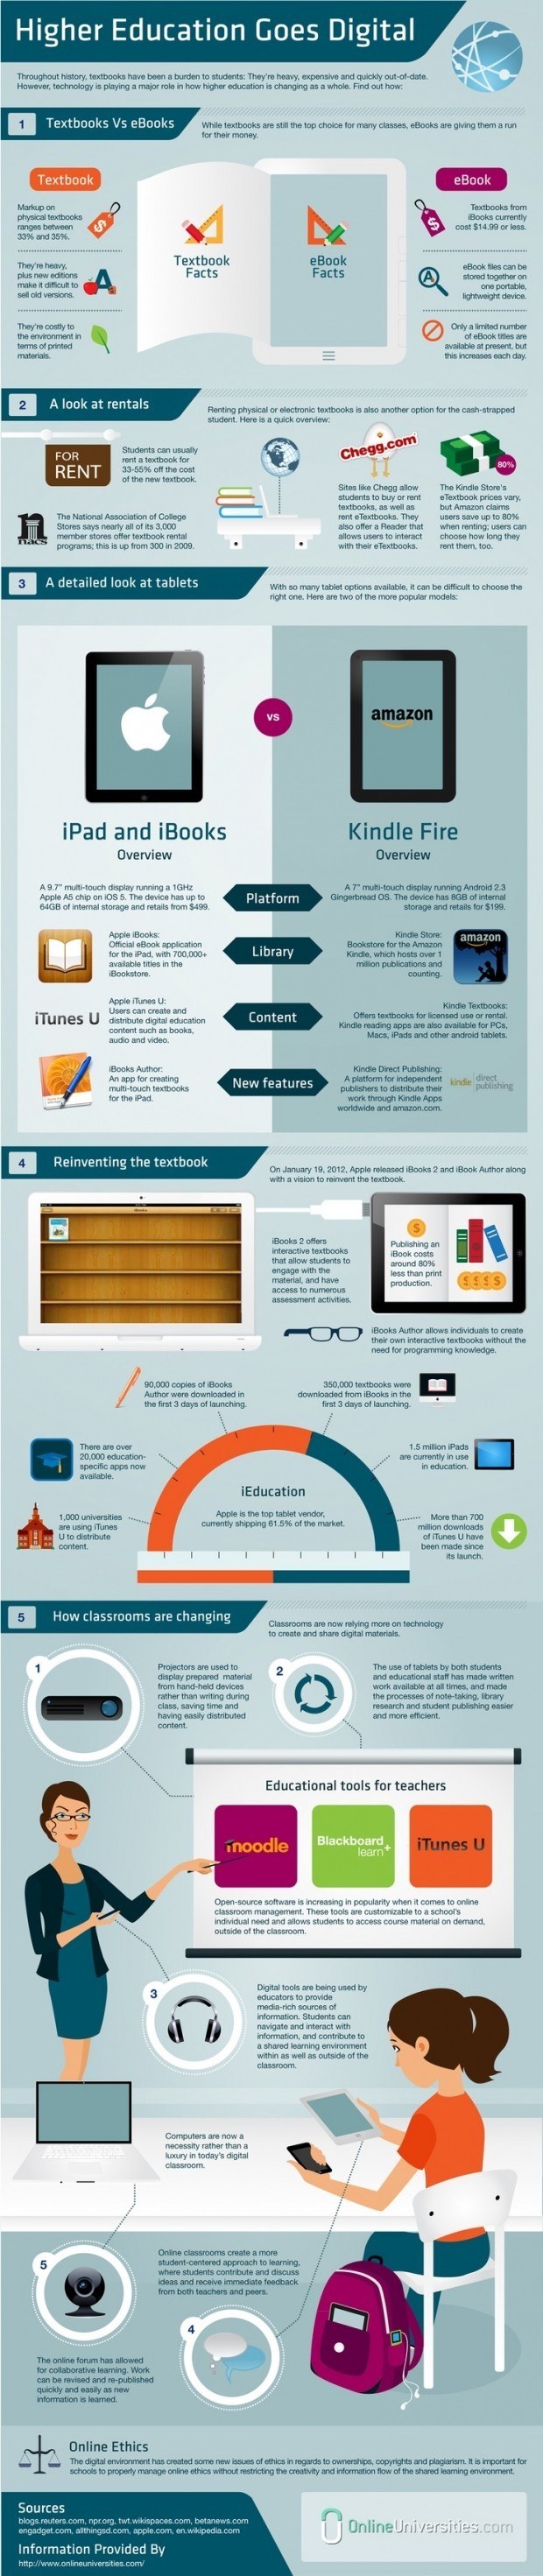 How Higher Education Is Going Digital Infographic thumbnail